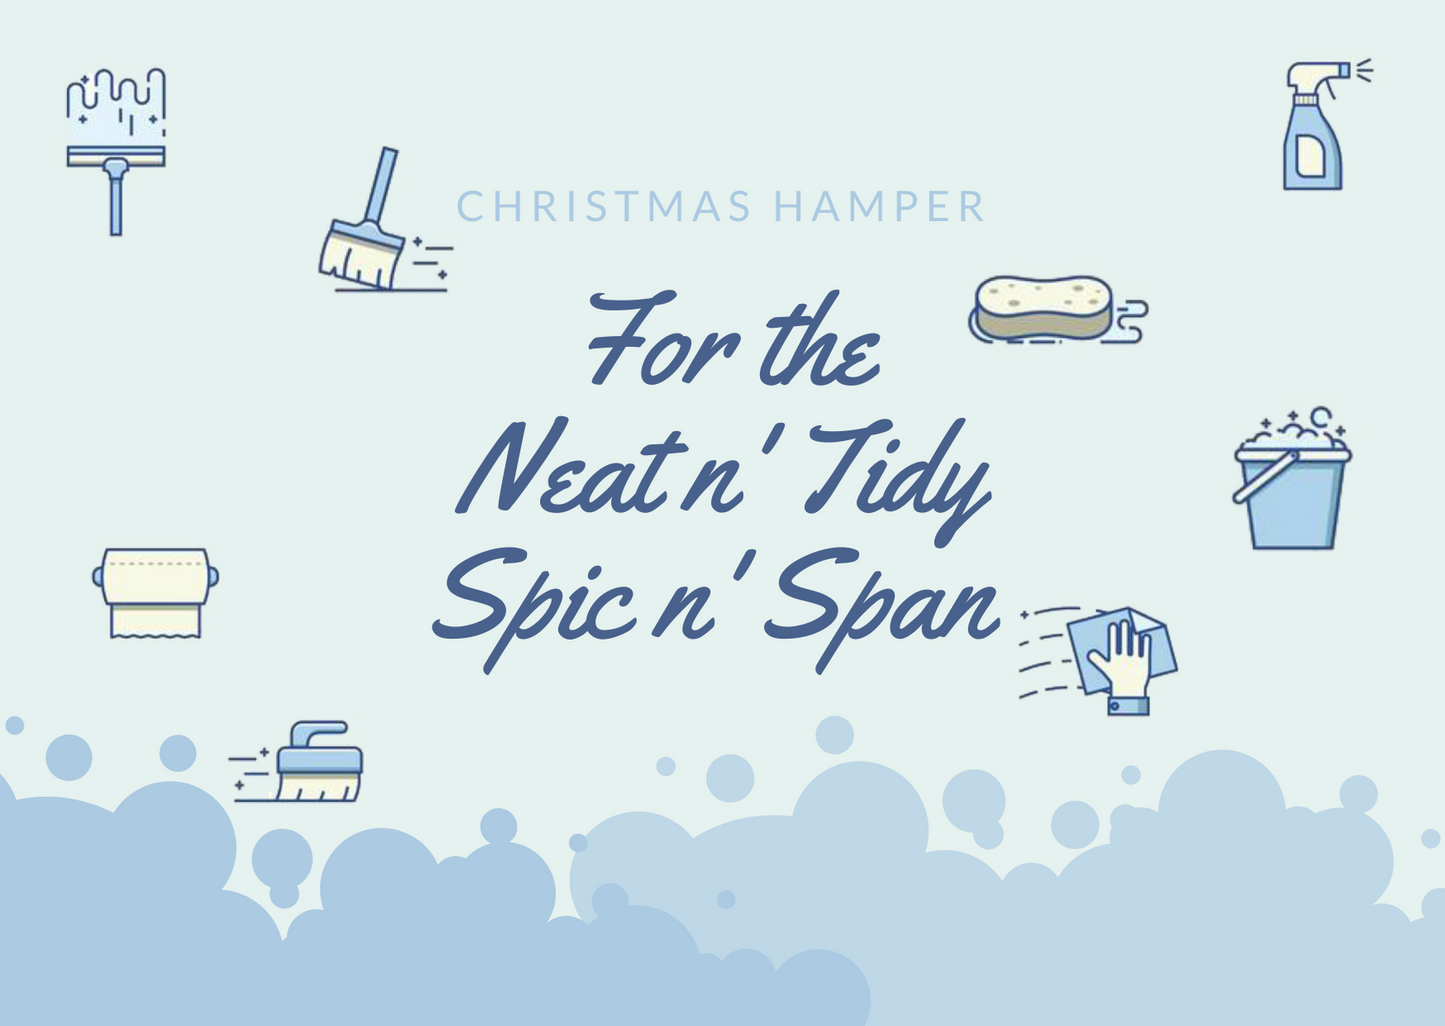 Christmas Hamper For the Neat N' Tidy